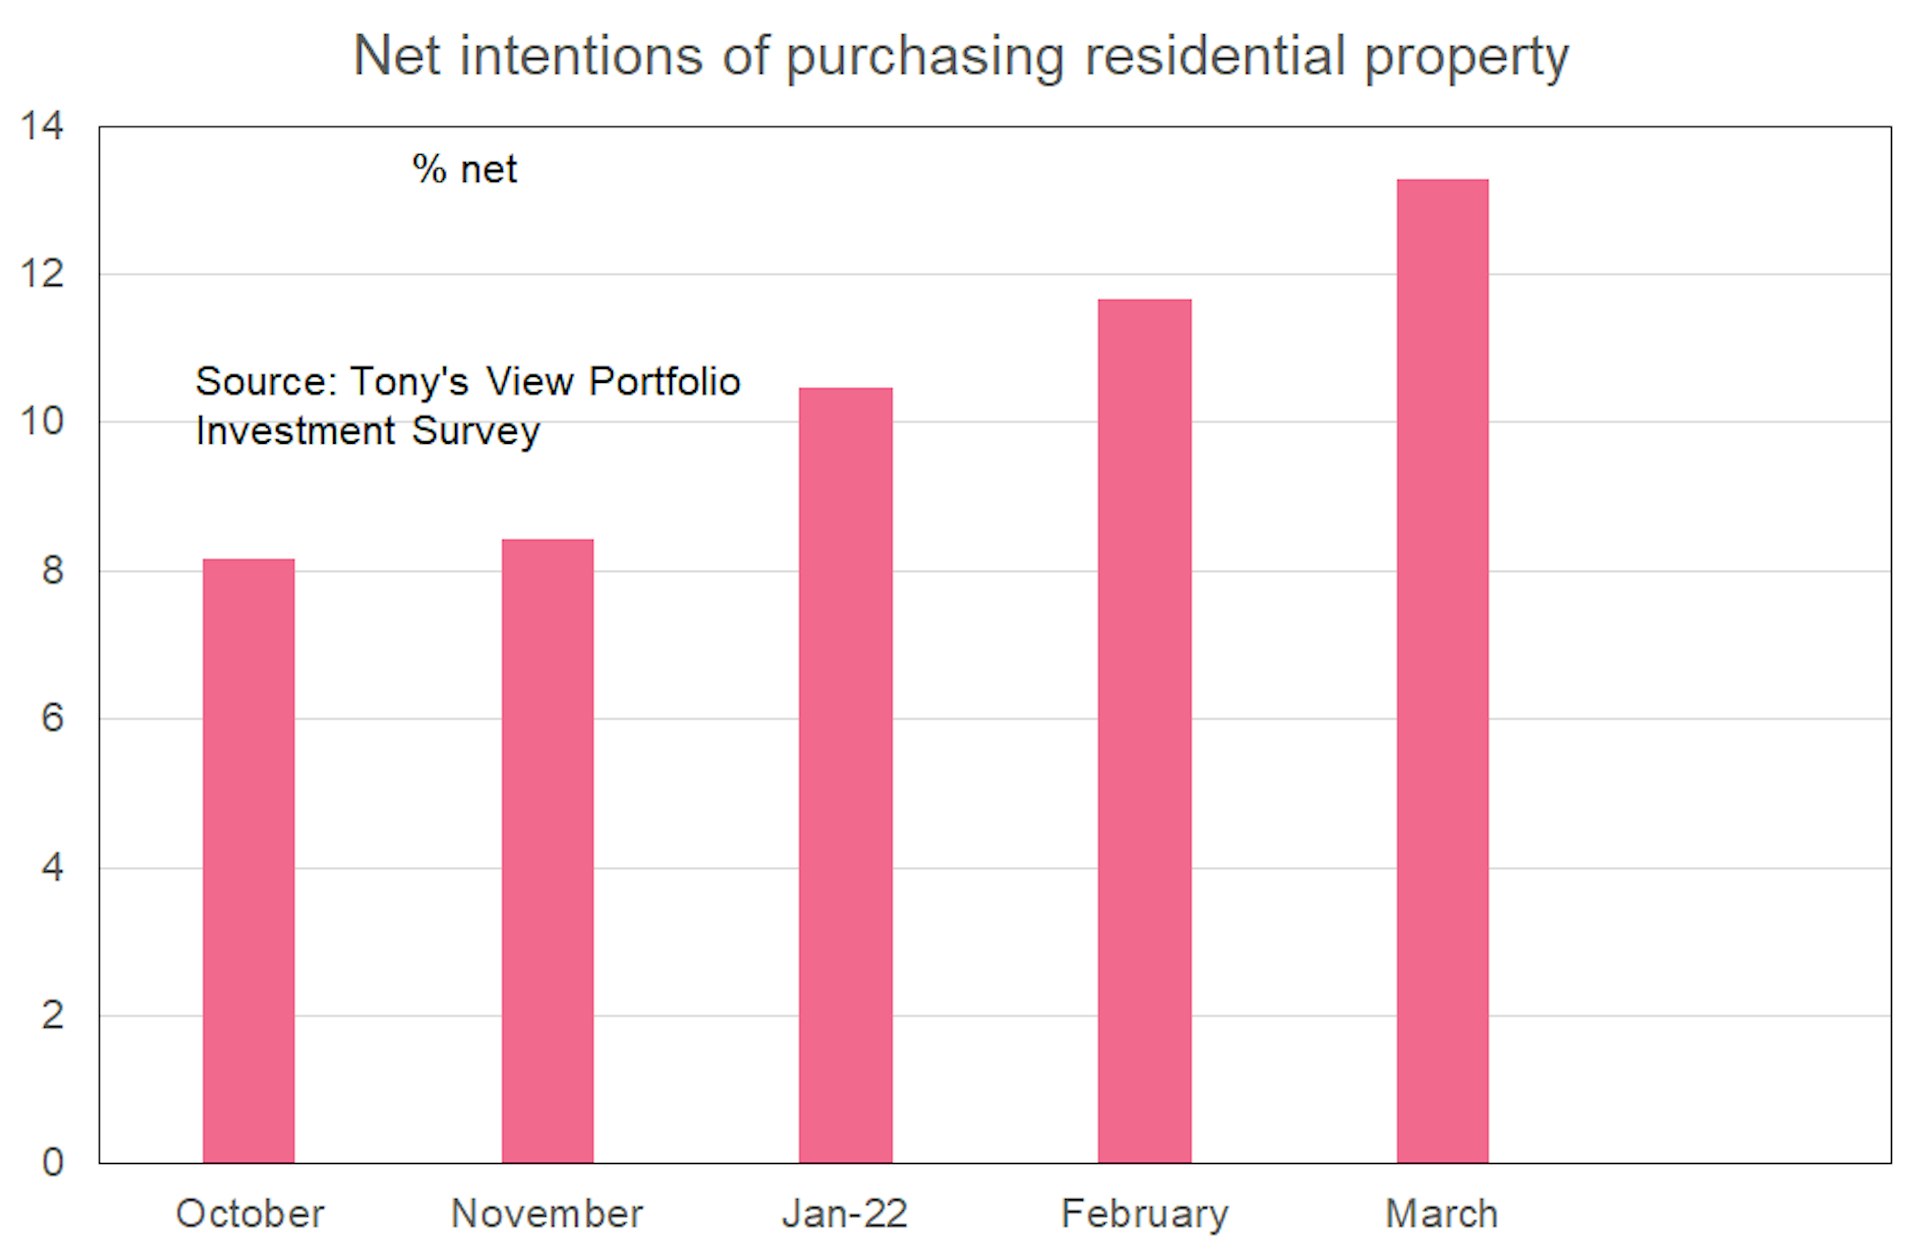 Bar graph showing net intentions of purchasing residential property growing steadily from 8% in October 2021, to 13% in March 2022.